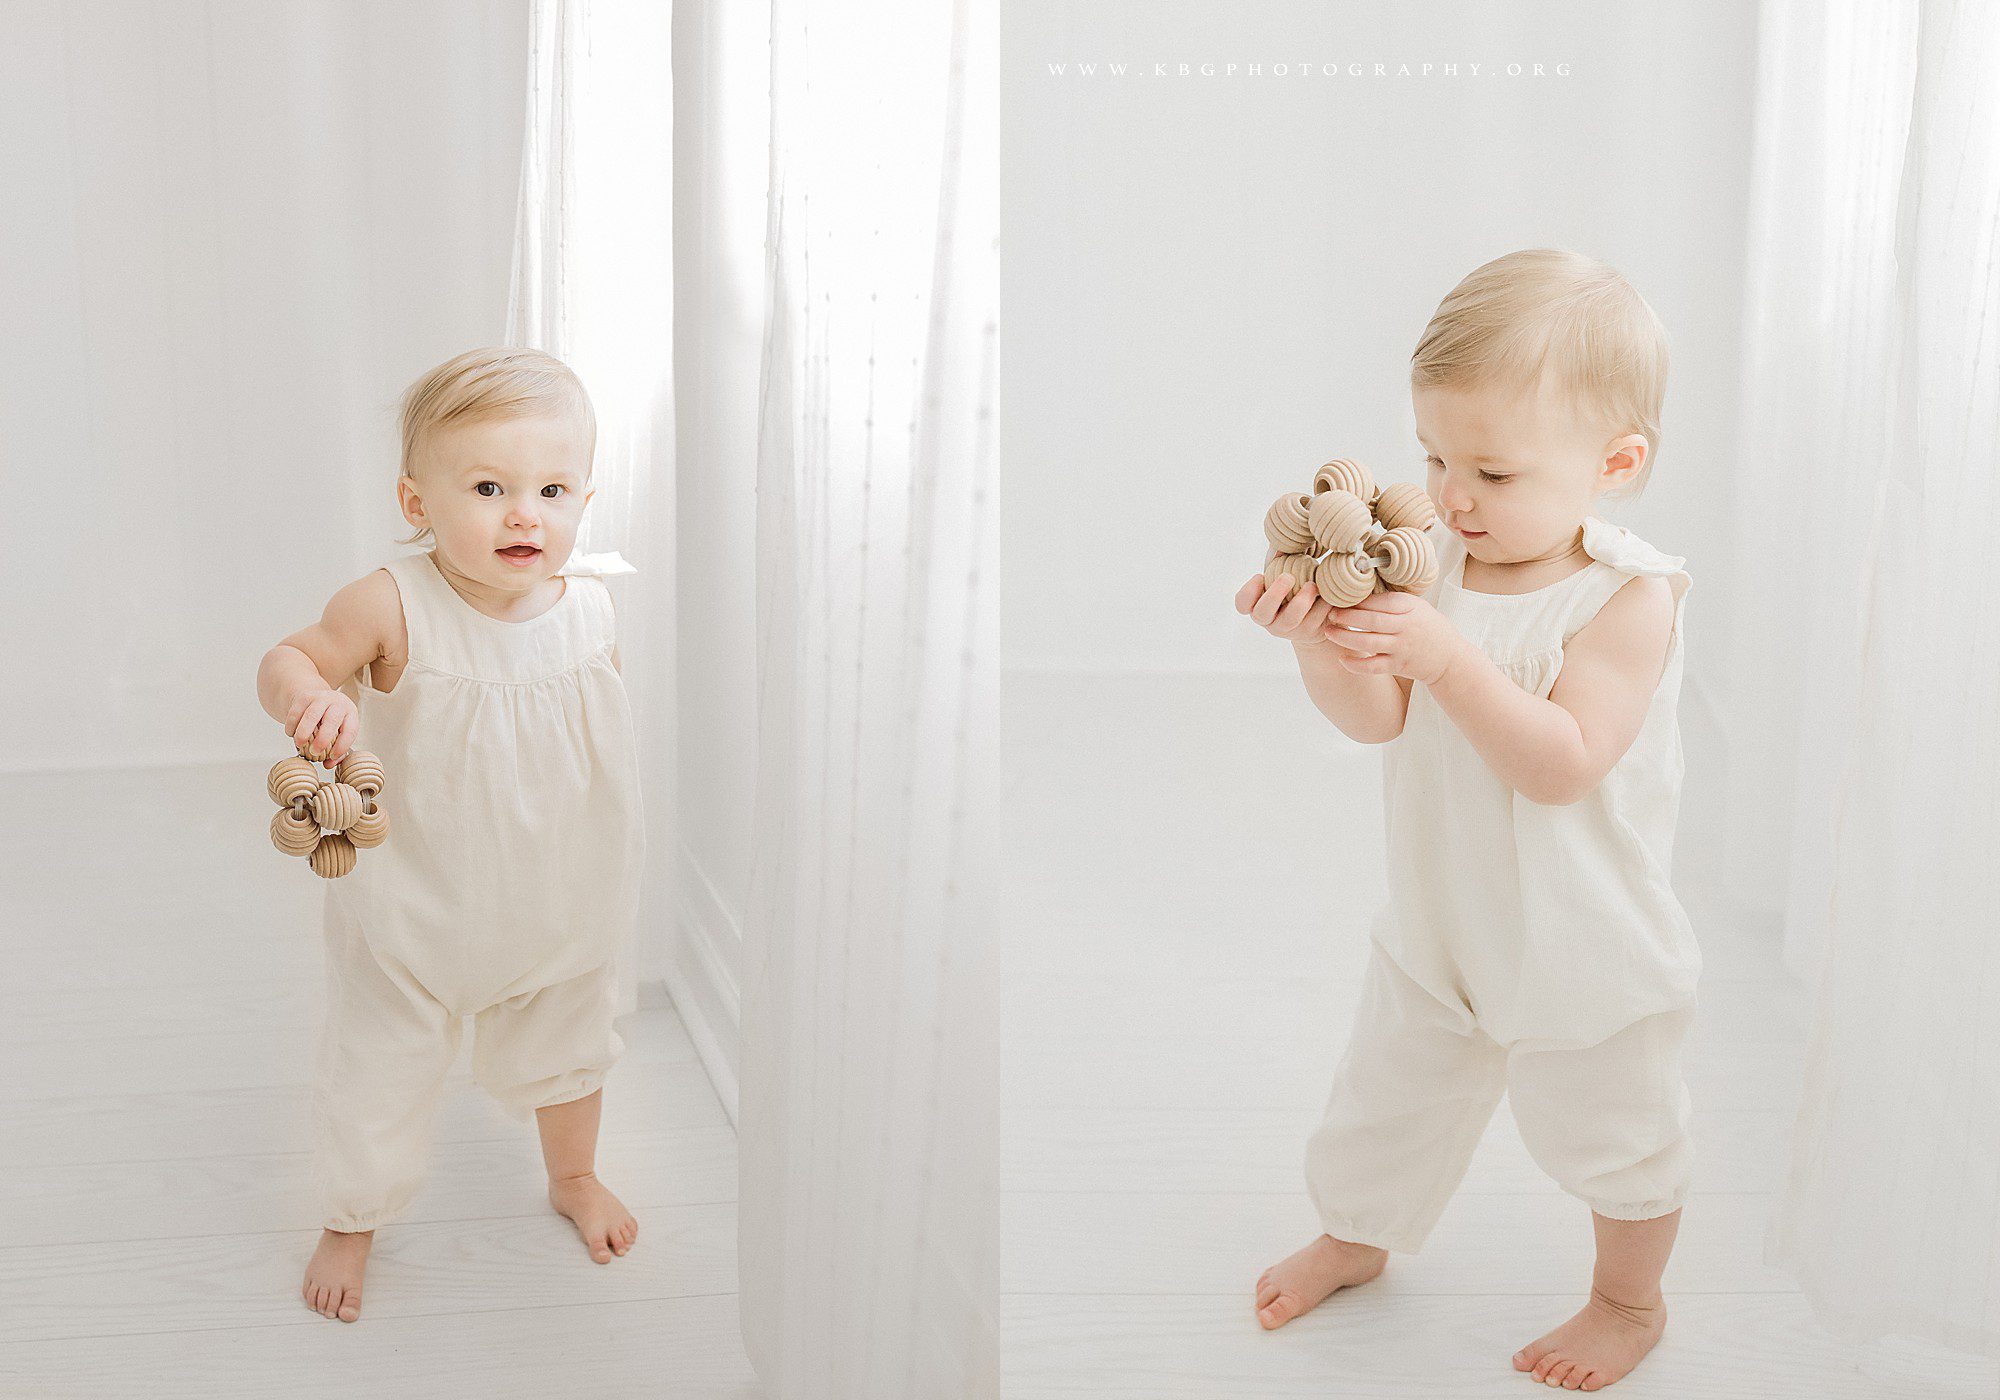 marietta newborn photographer - one year old baby standing up playing with a toy